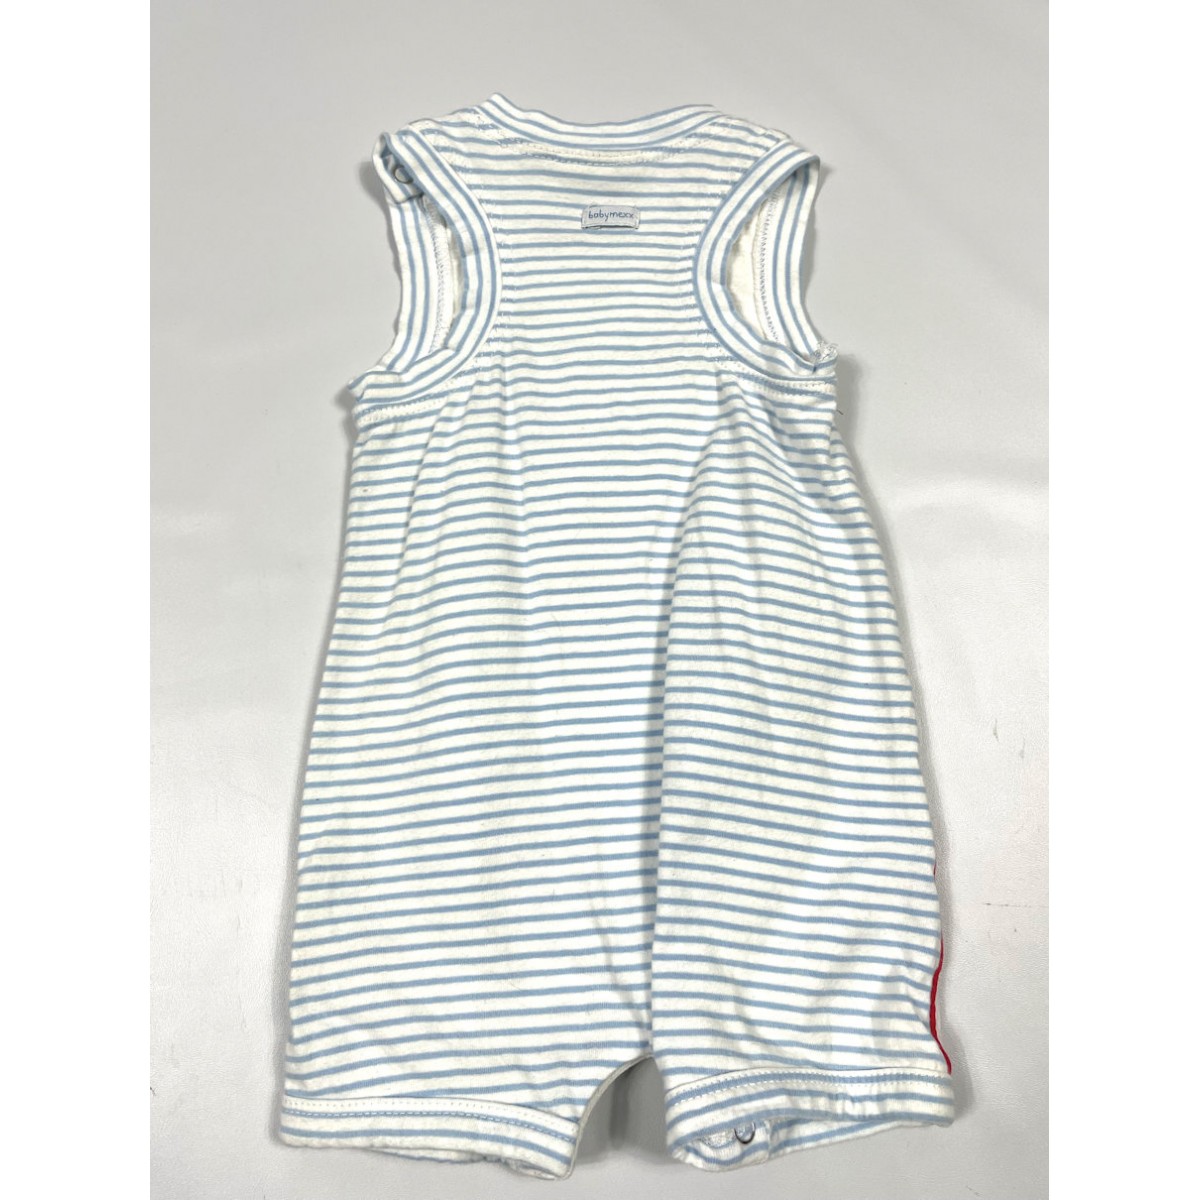 jumper barboteuse mexx / 3-6 mois